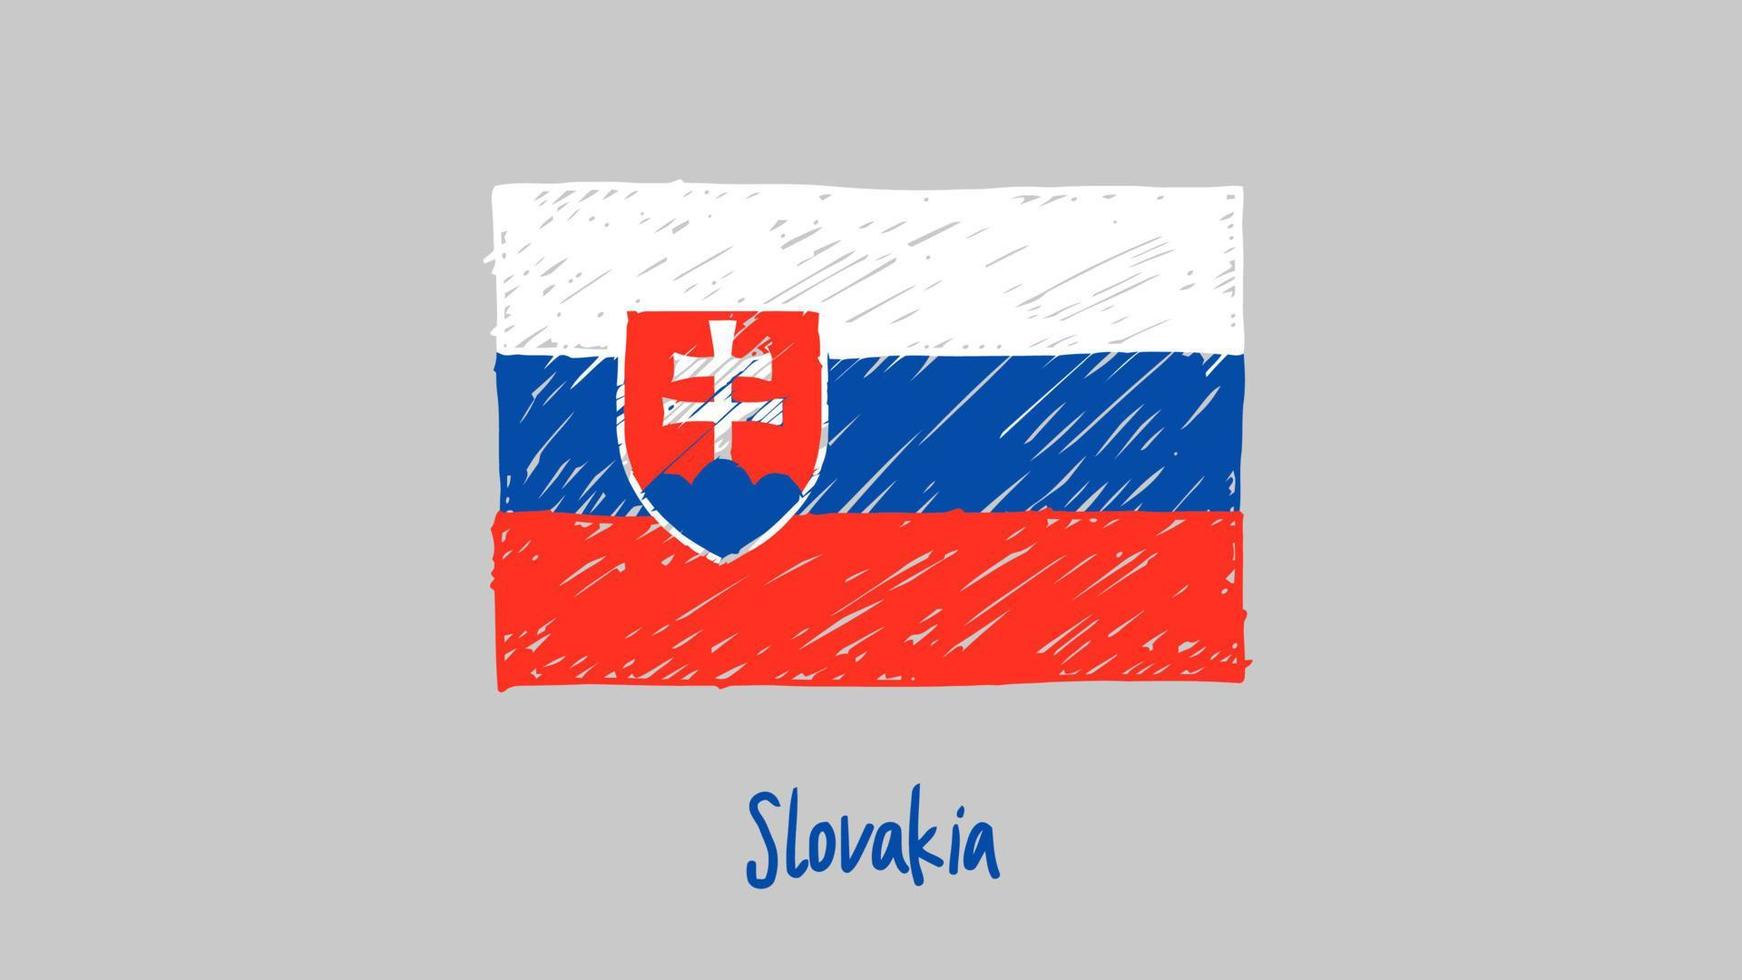 Slovakia National Country Flag Marker or Pencil Sketch Illustration Vector